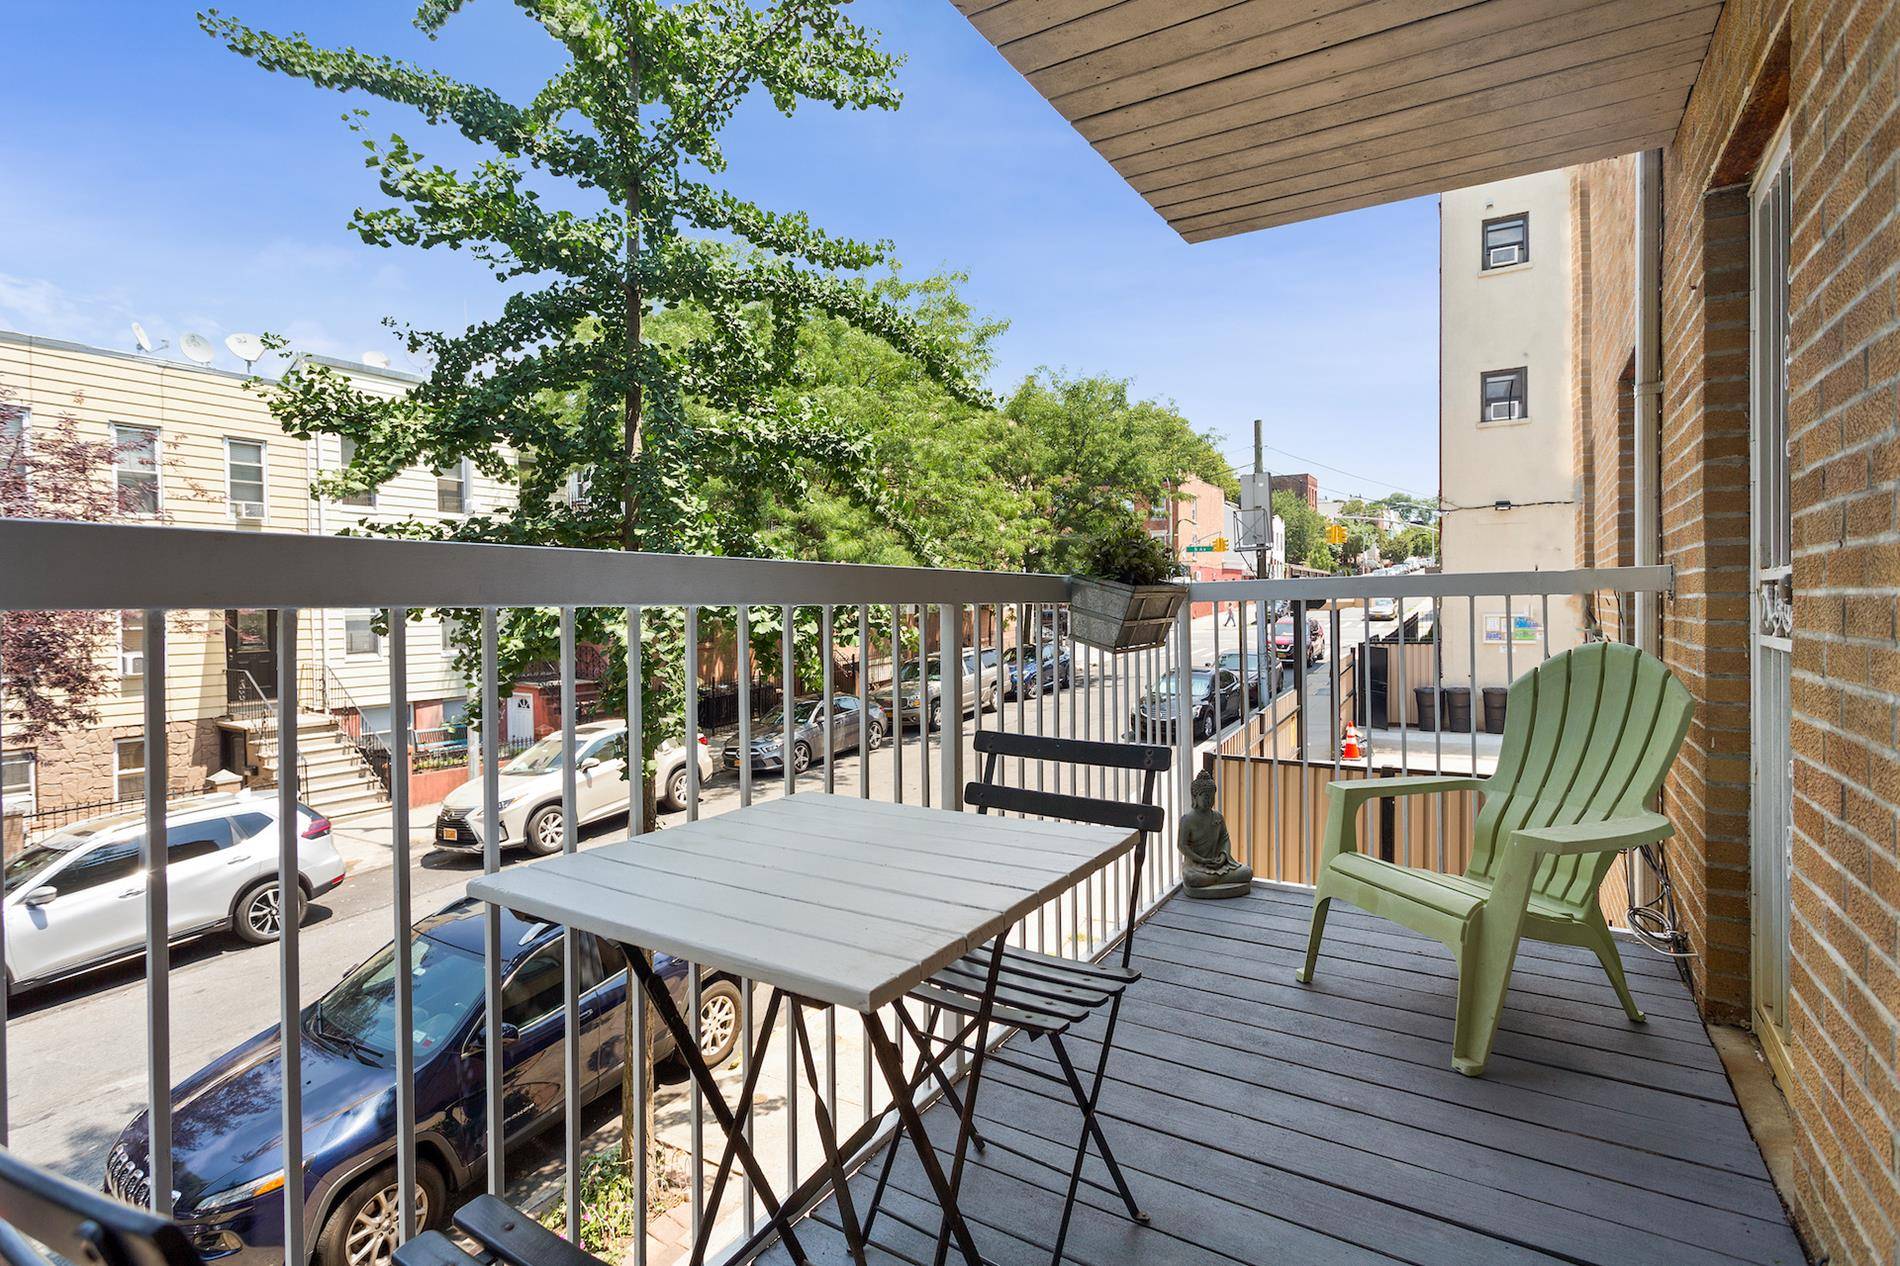 Get your very own piece of Brooklyn sunshine with this charming one and a half bedroom, convertible two in the Prospect Park adjacent neighborhood of Greenwood South Slope.